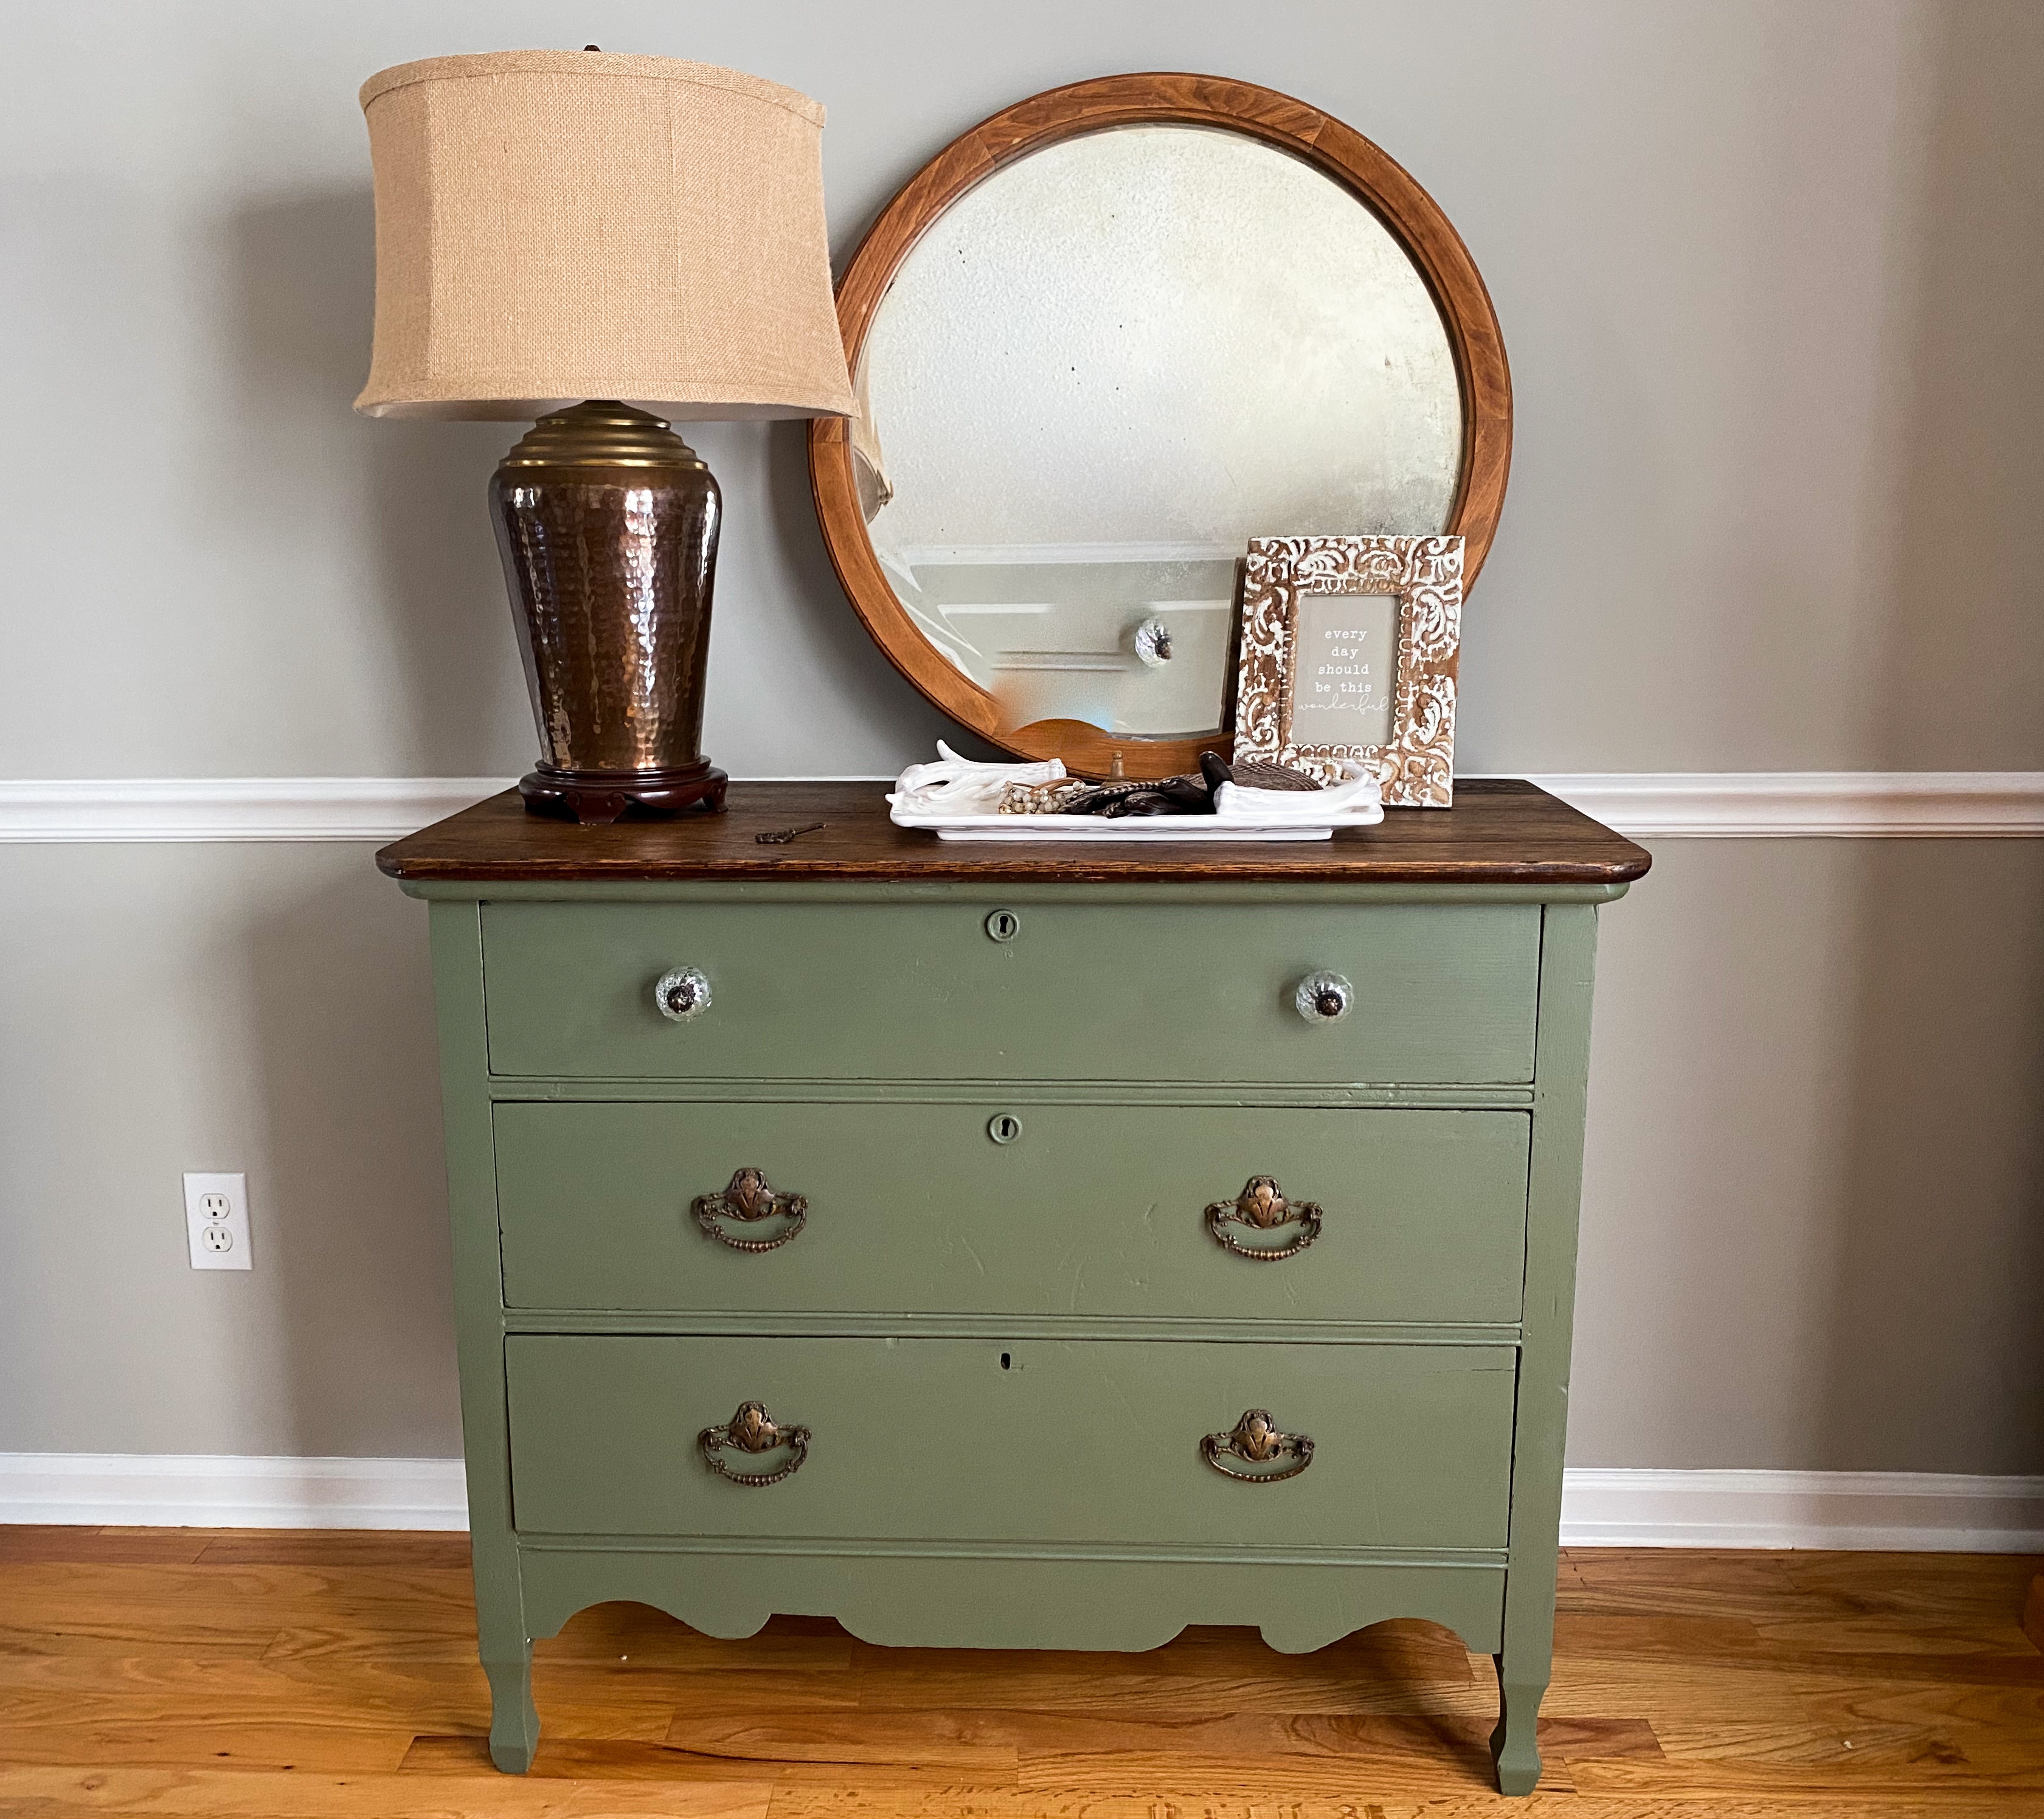 A Neglected Oak Dresser And The Coolest Antique Mirror EVER